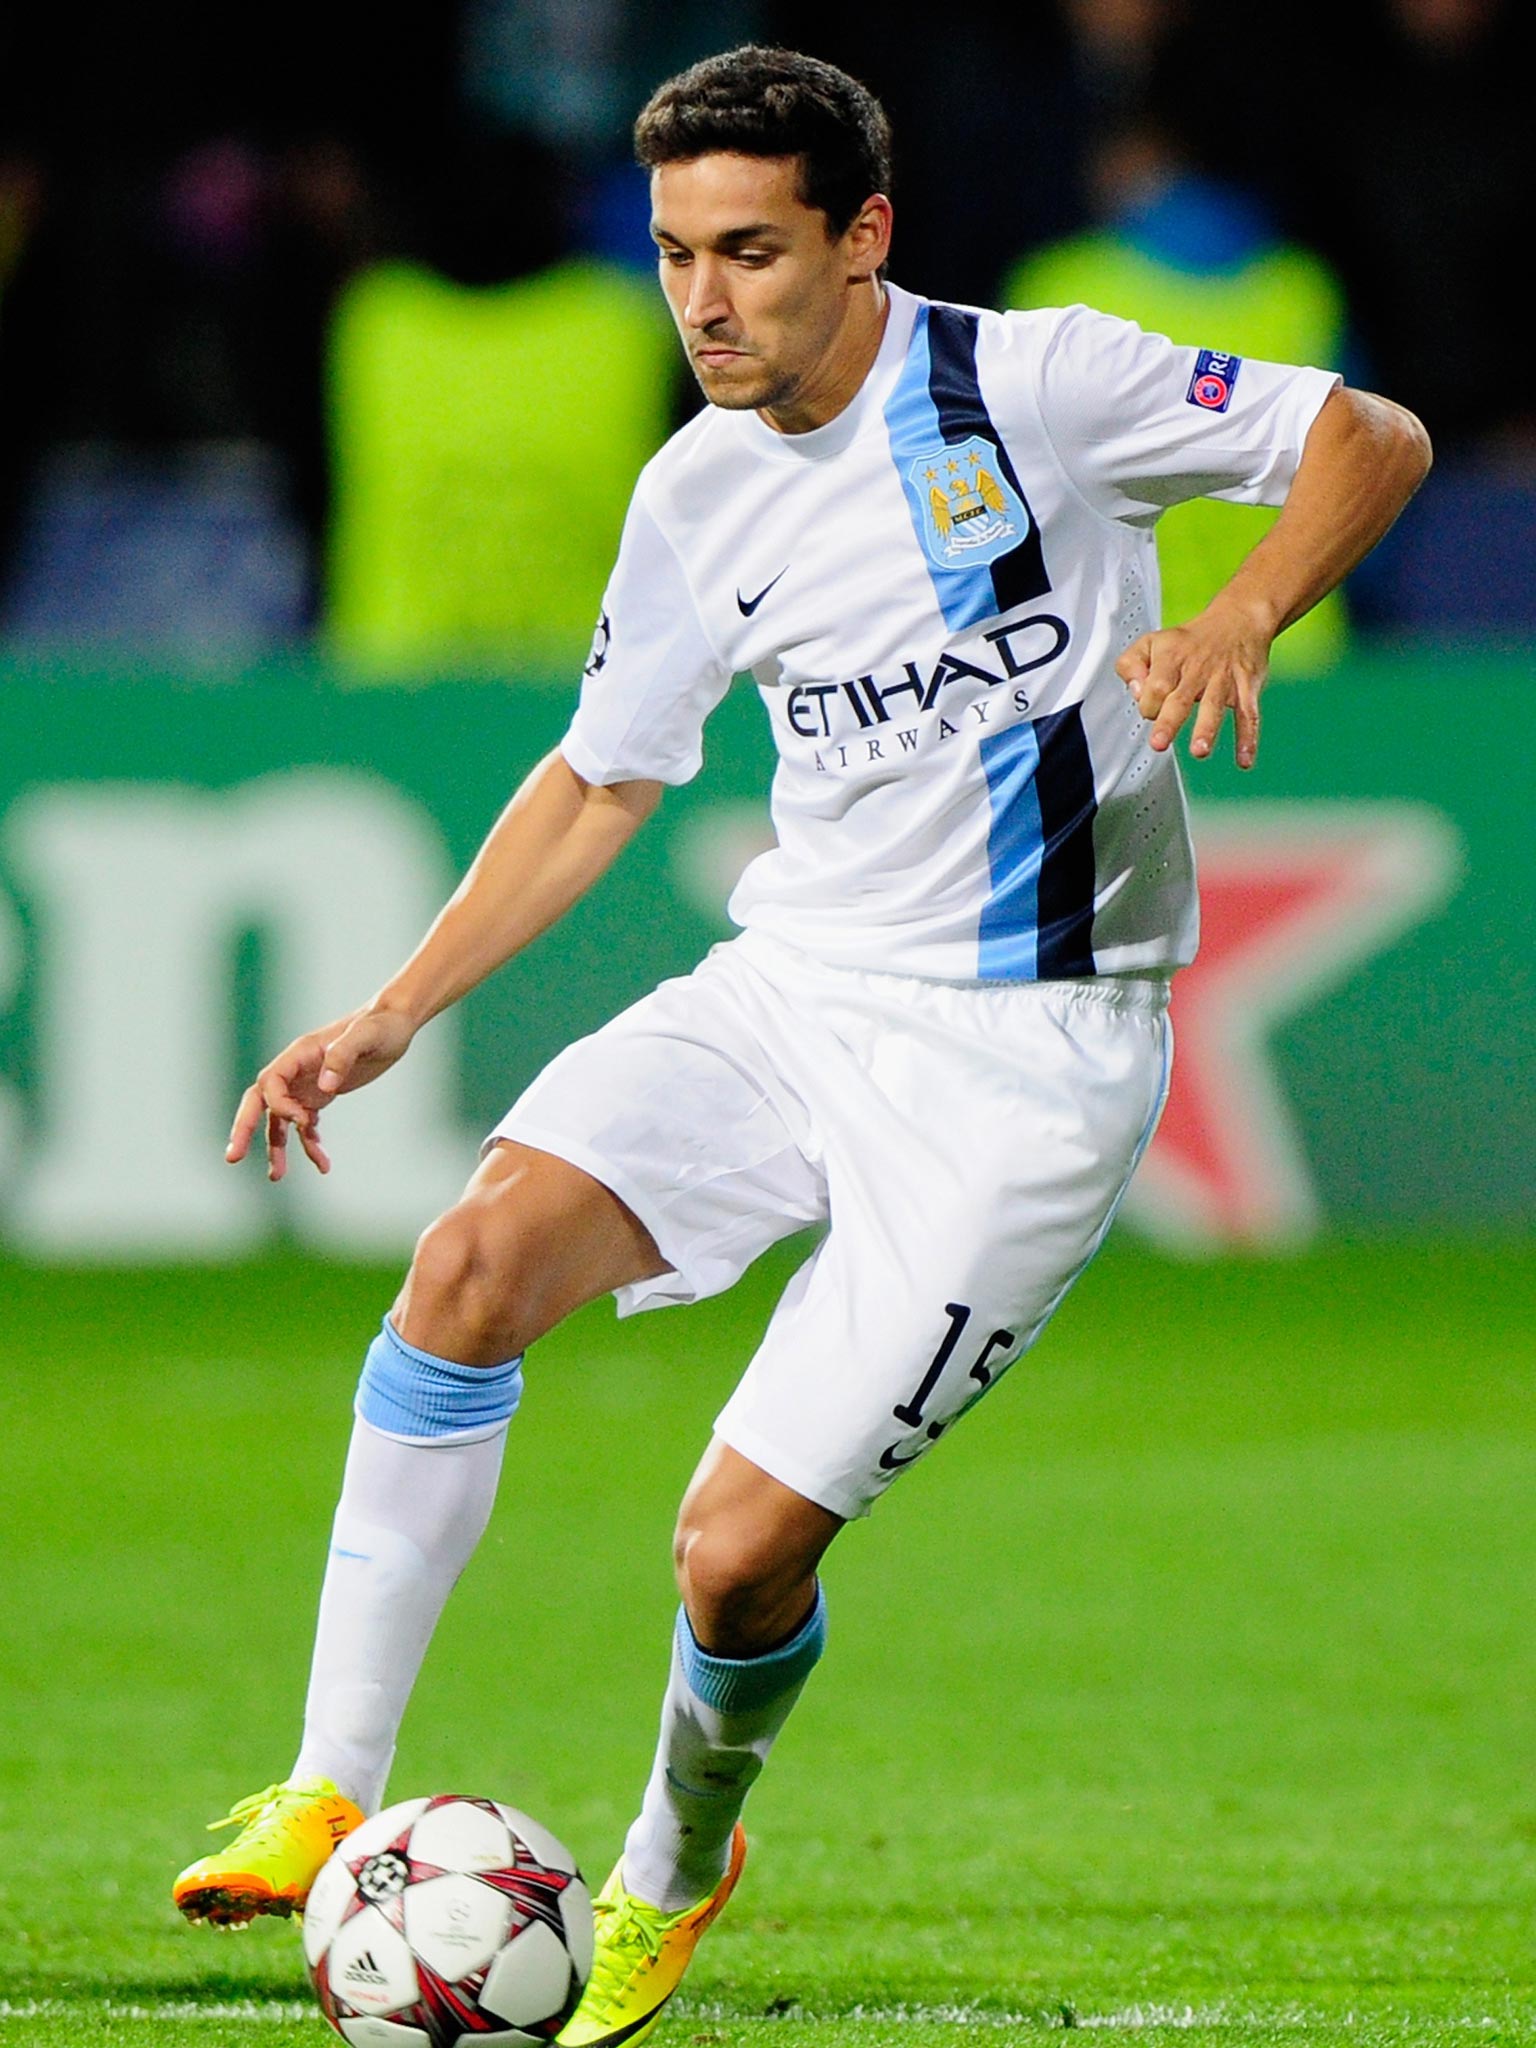 Jesus Navas, now of Manchester City, scored for Seville against Barcelona in March 2011